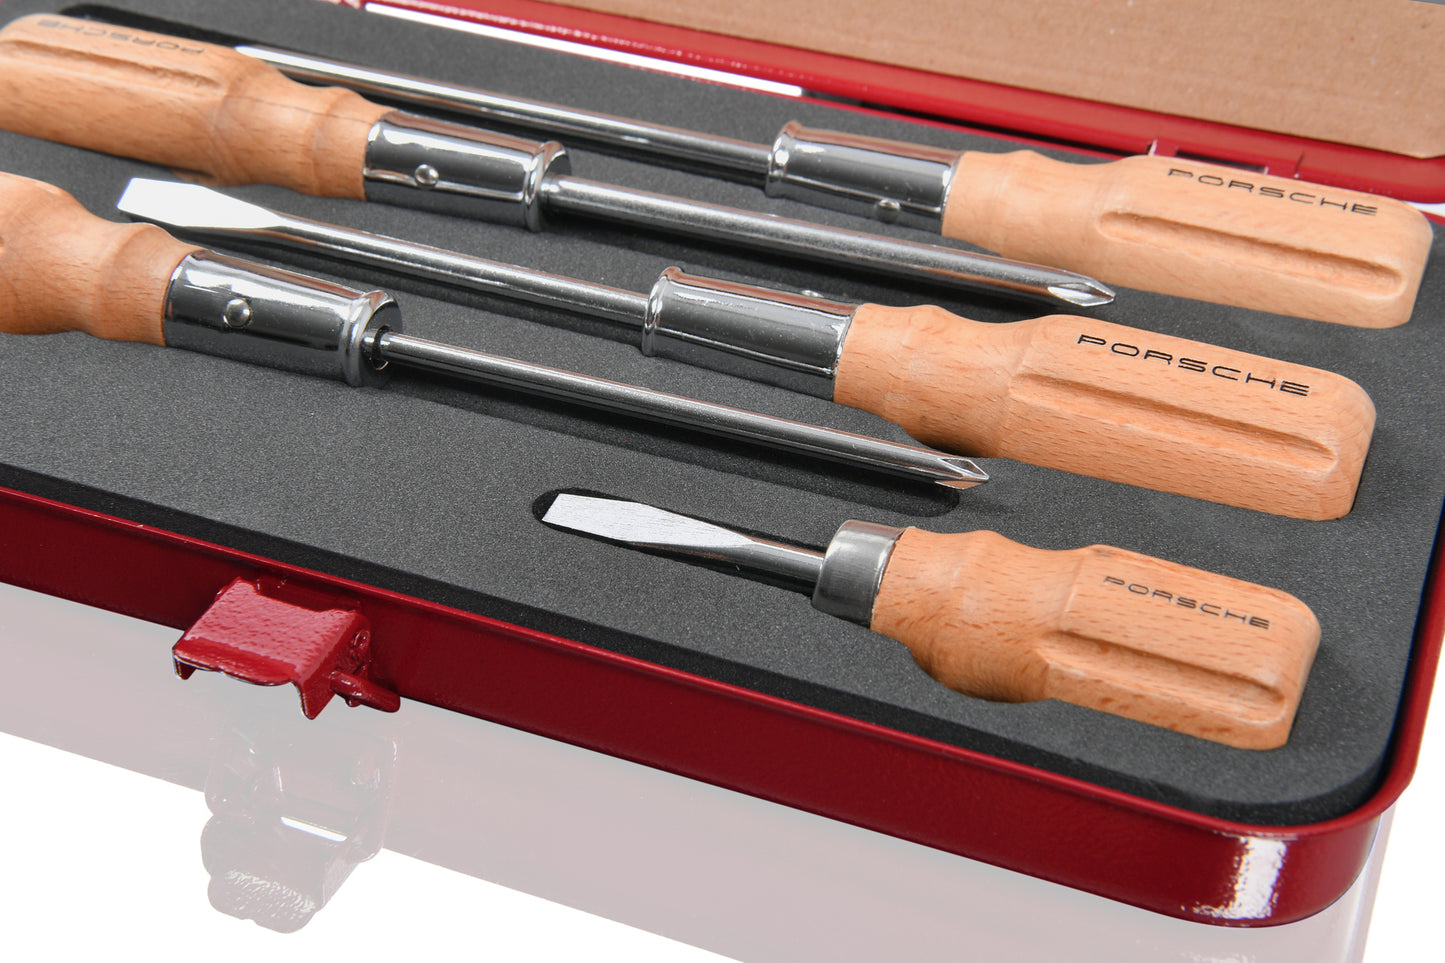 Wooden-handle screwdriver tool set with box, five-piece